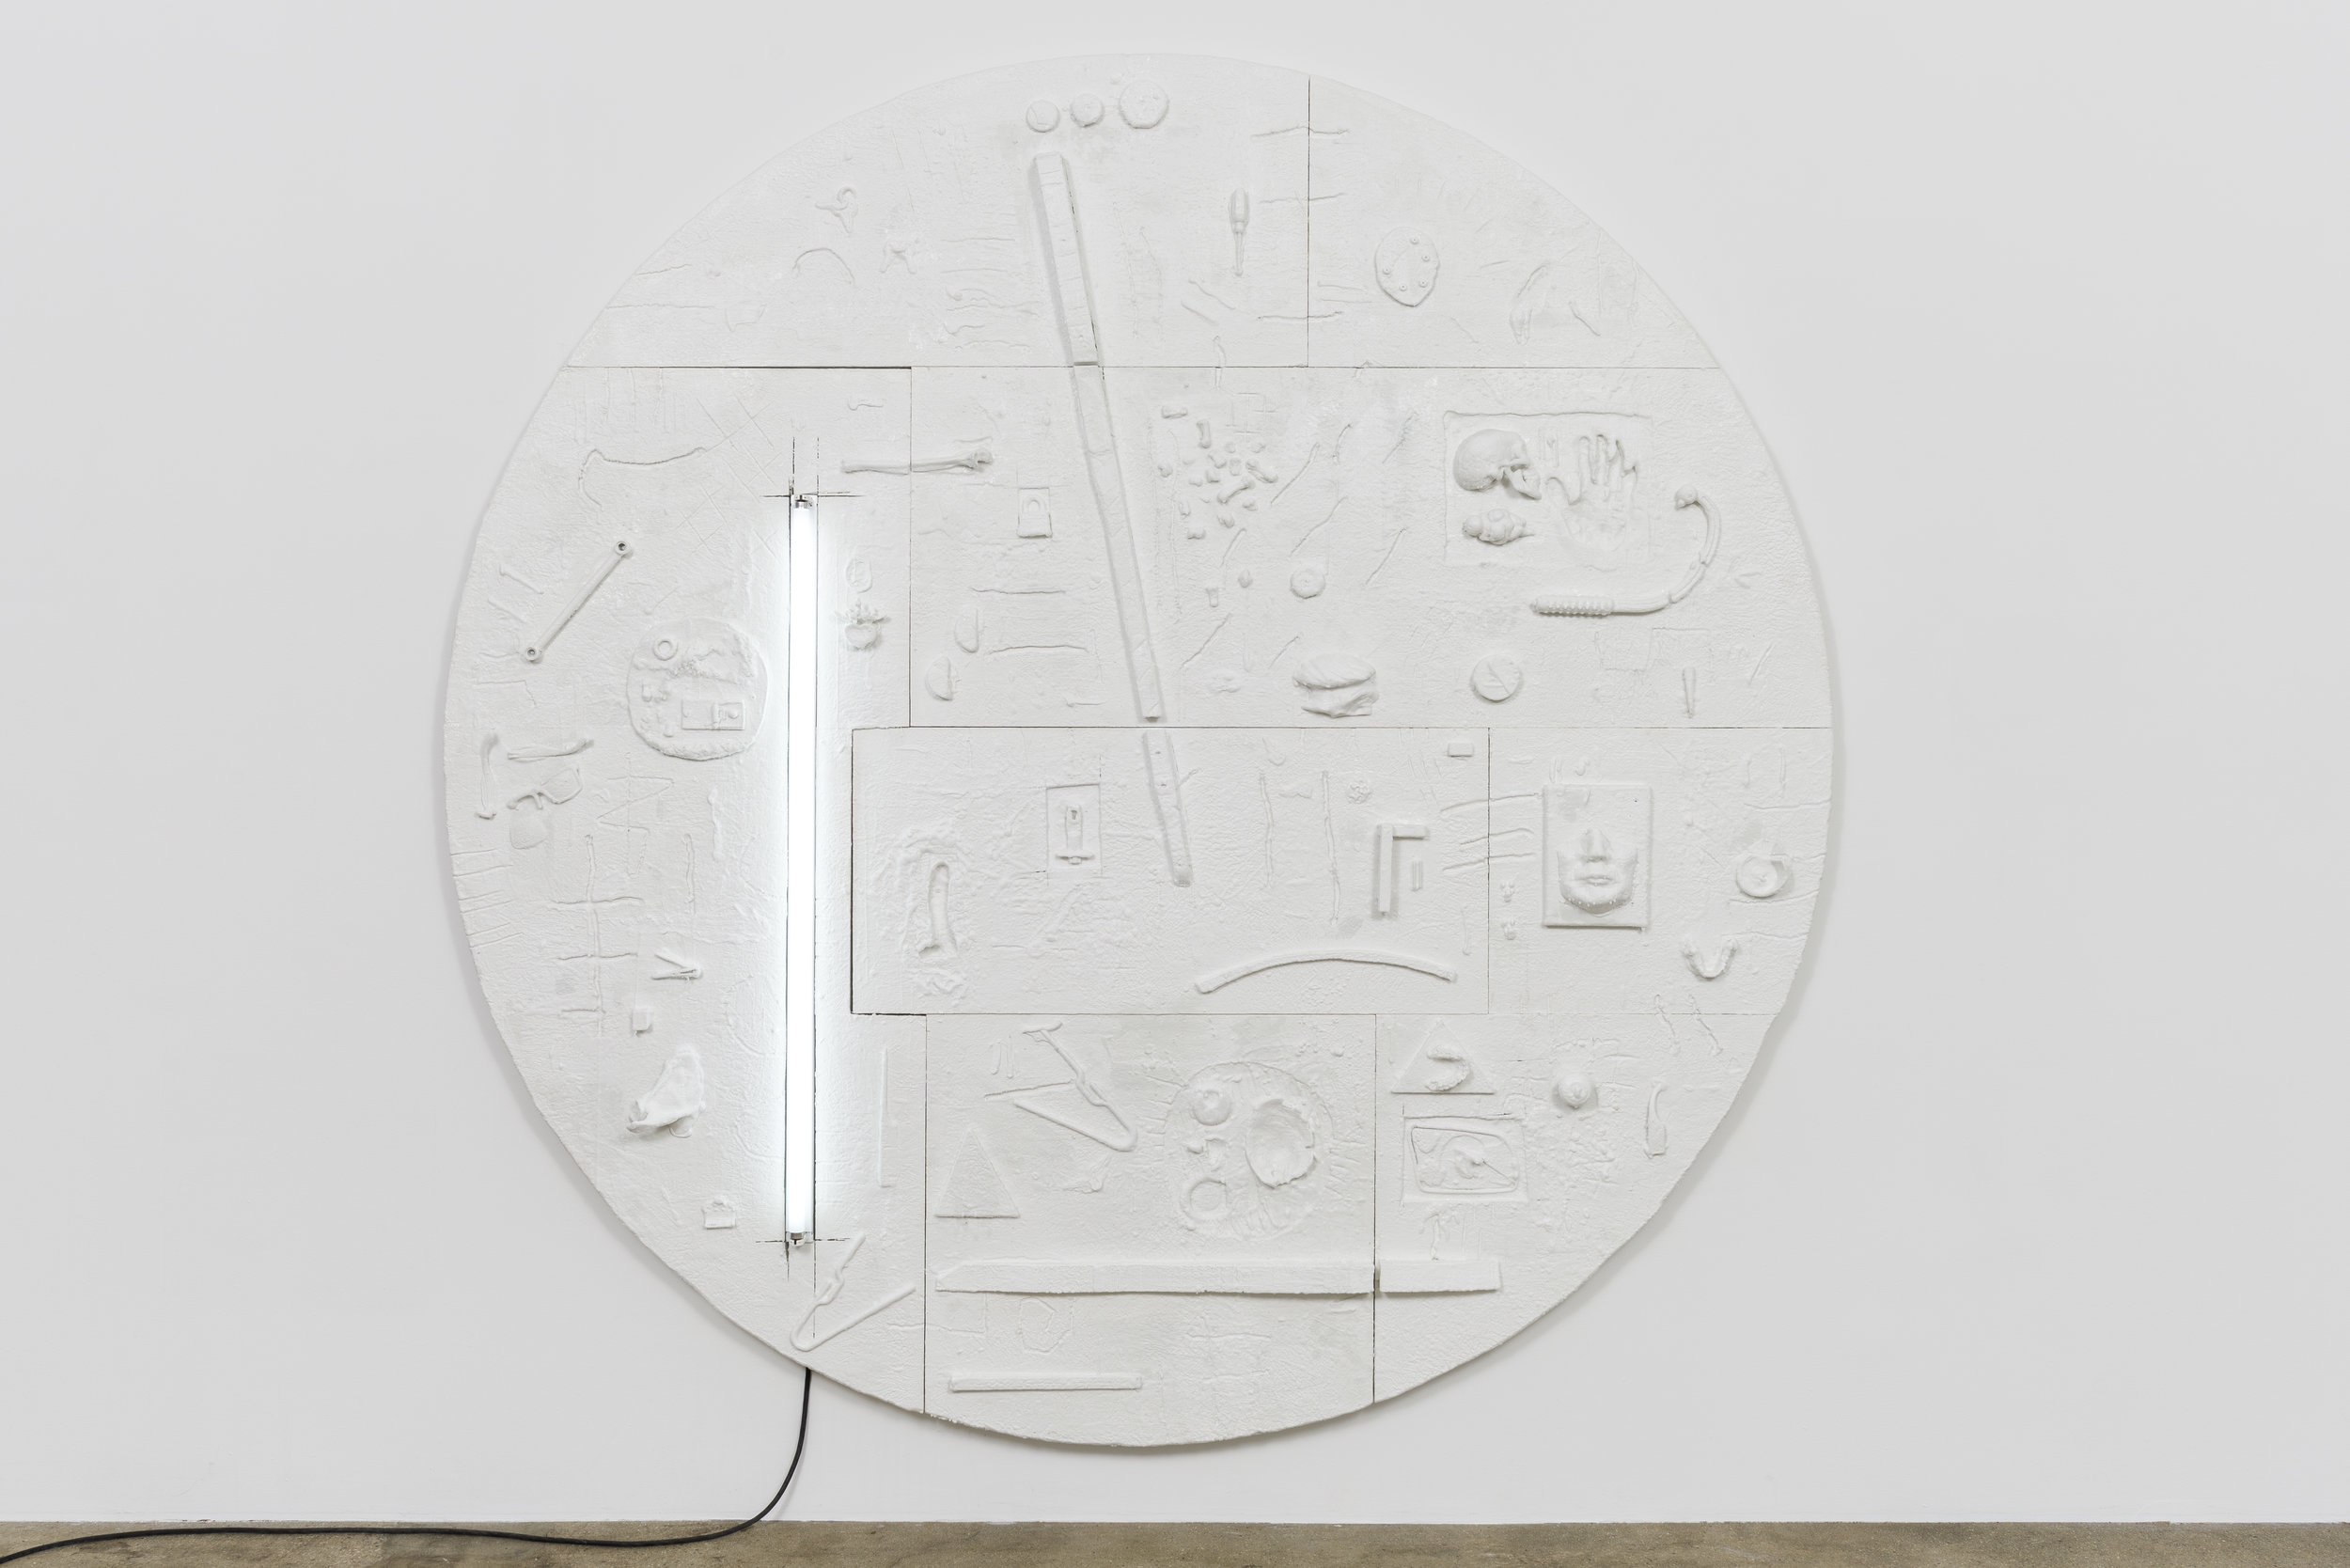   Don Edler  Two Minutes To Midnight   2017-2019 Plywood, styrofoam, plaster, miscellaneous detritus, fluorescent light, polymer paint, petroleum wax 92 in x 92 in x 3 in  Photo by Ruben Diaz 